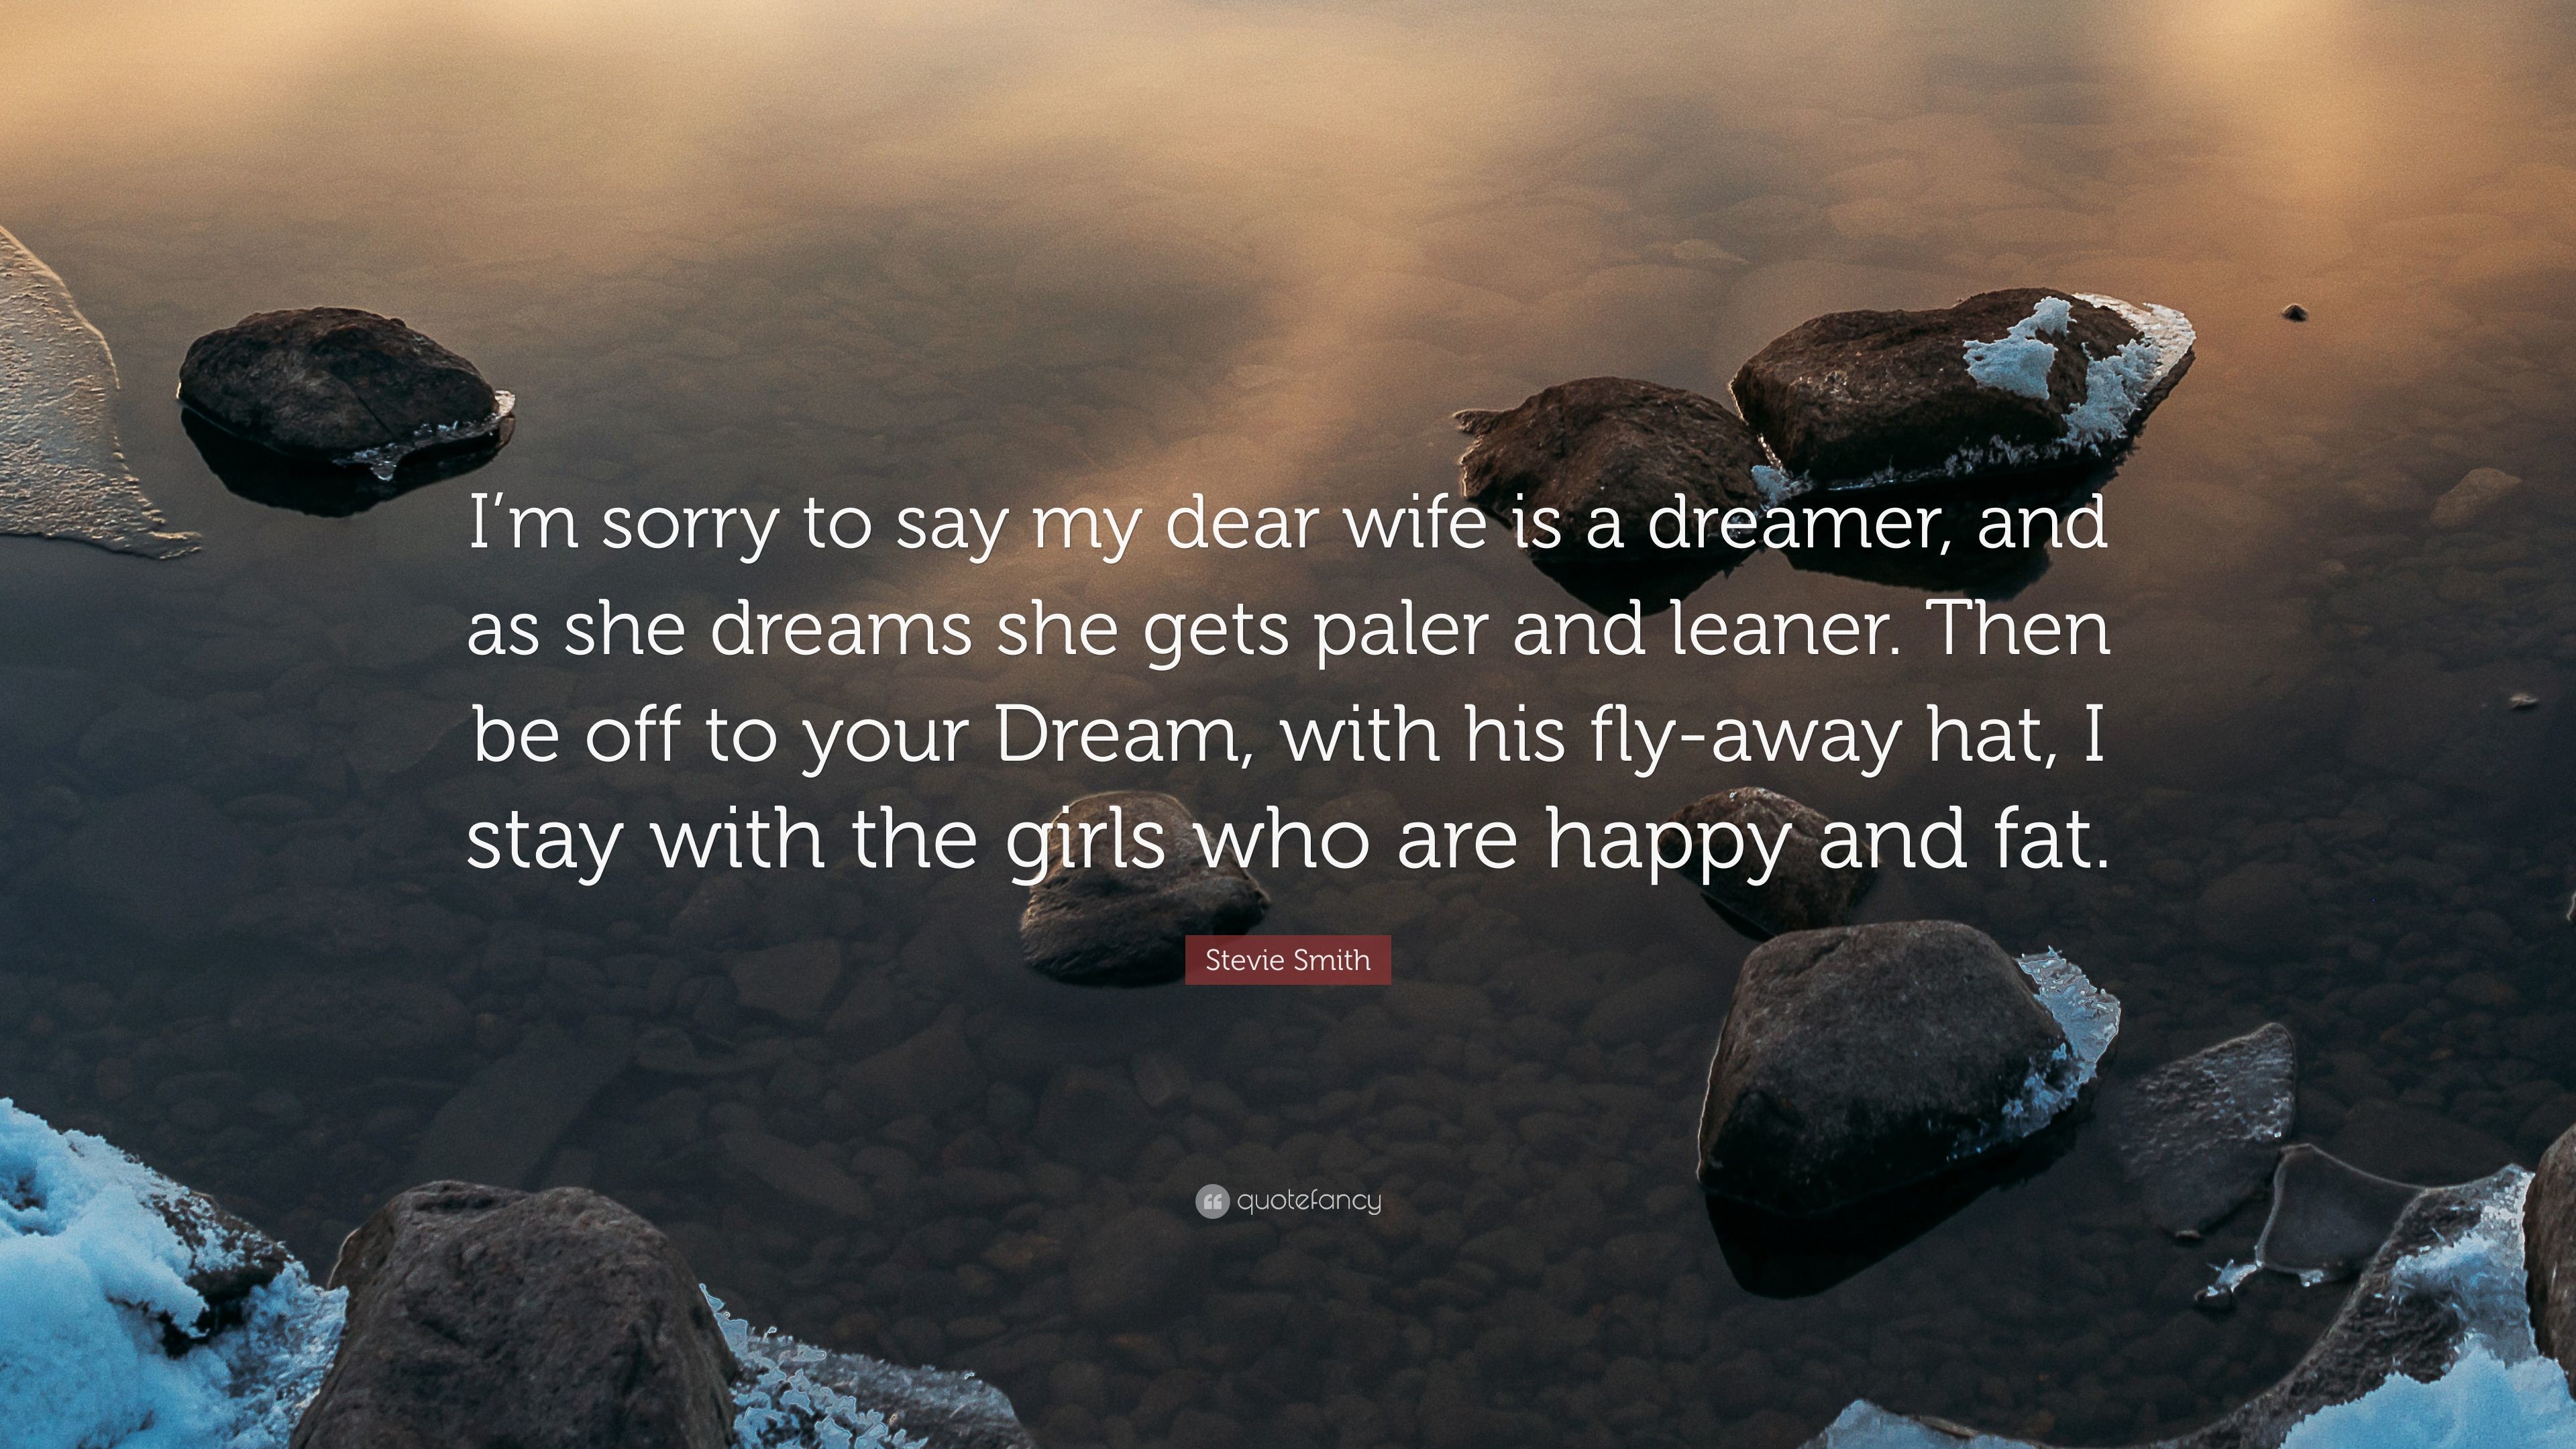 3840x2160 Stevie Smith Quote: “I'm sorry to say my dear wife is a